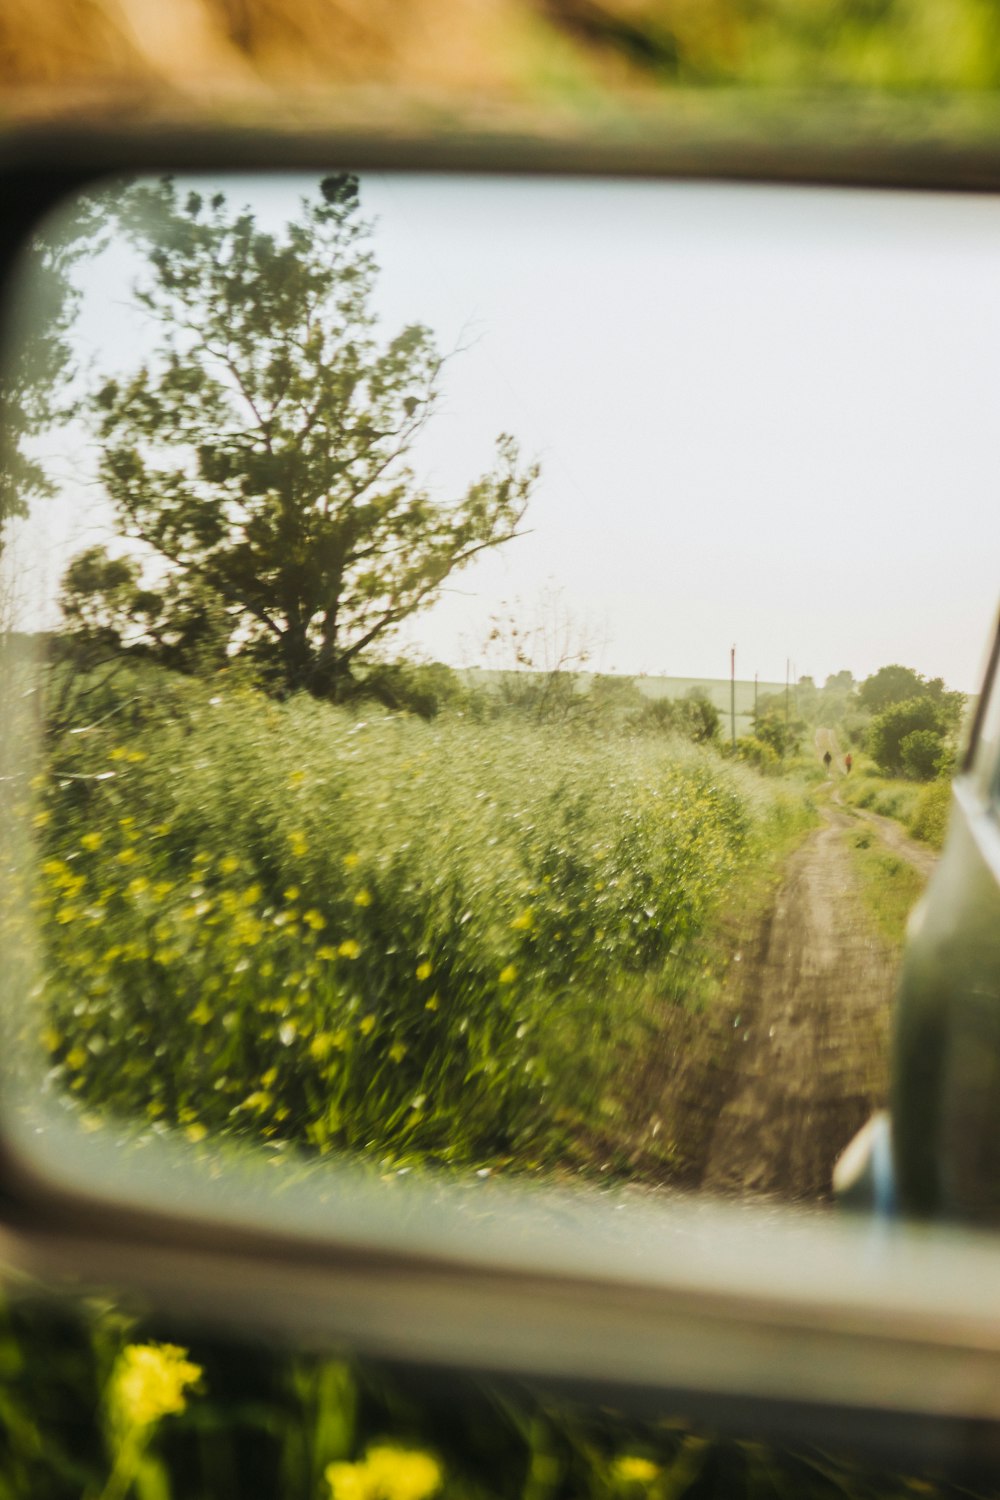 a rear view mirror with a car in the reflection